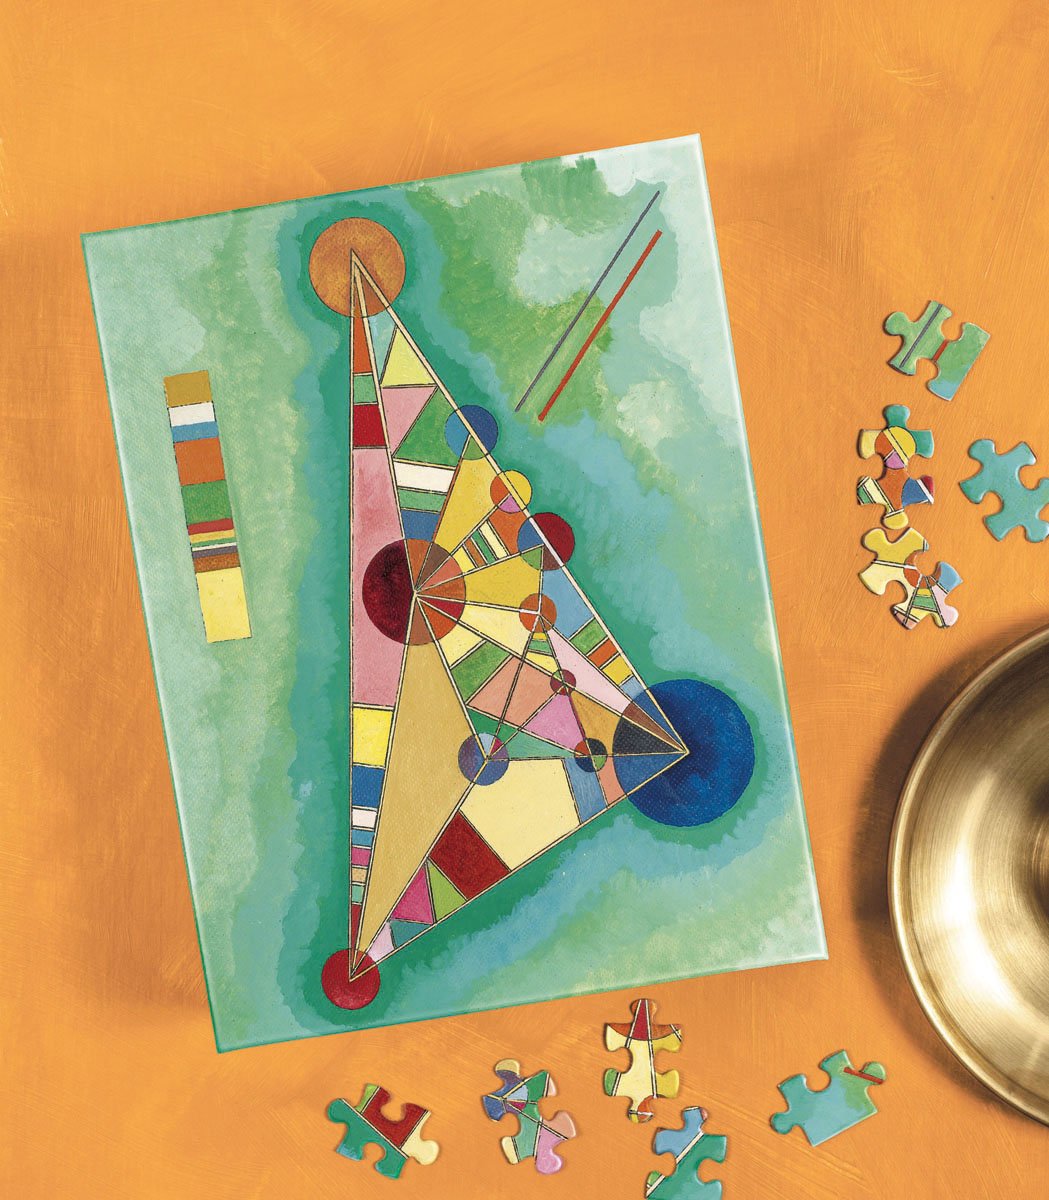 Variegation in the Triangle by Vasily Kandinsky covers a 500 piece puzzle box